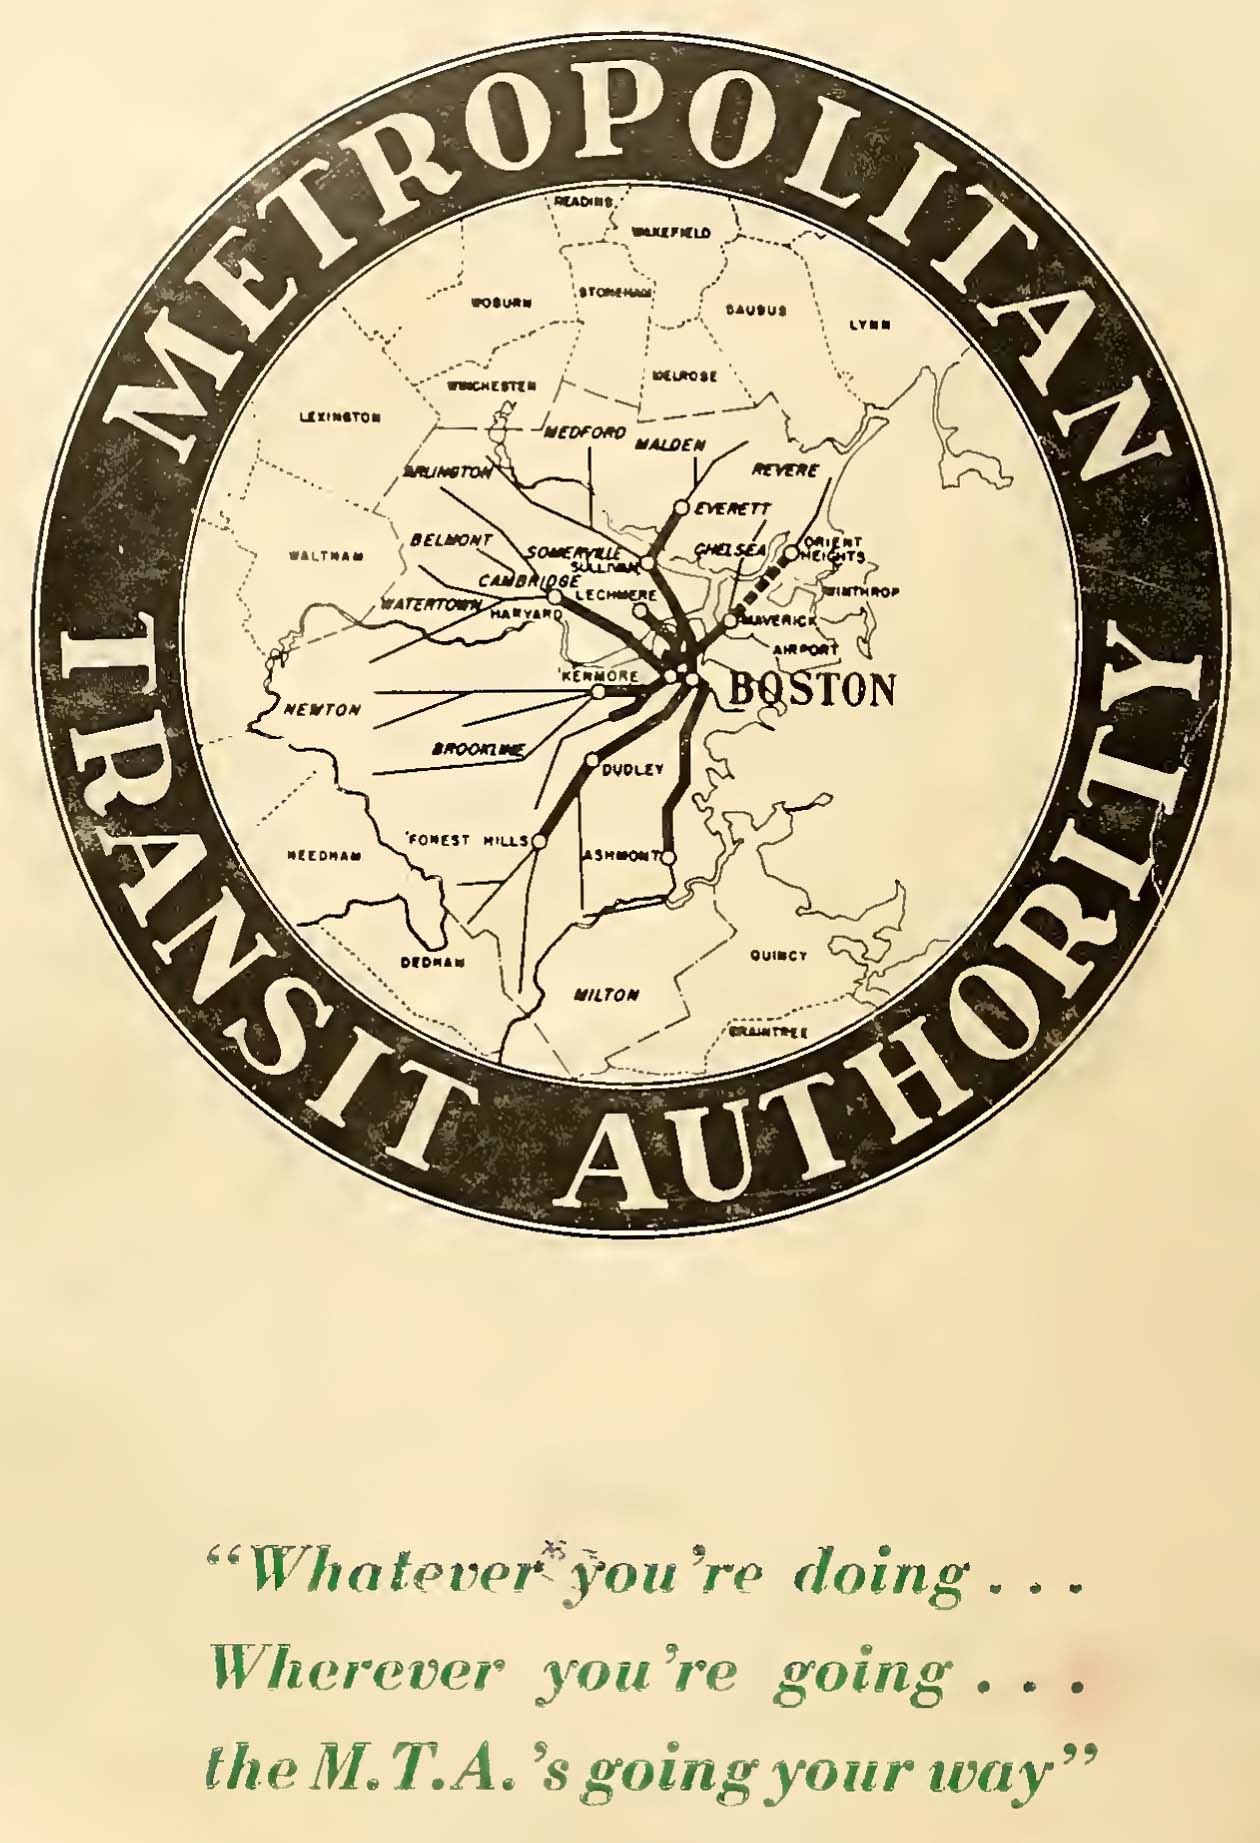 Image of MTA Logo from “Second Annual Report of the Board of Public Trustees of the MTA”